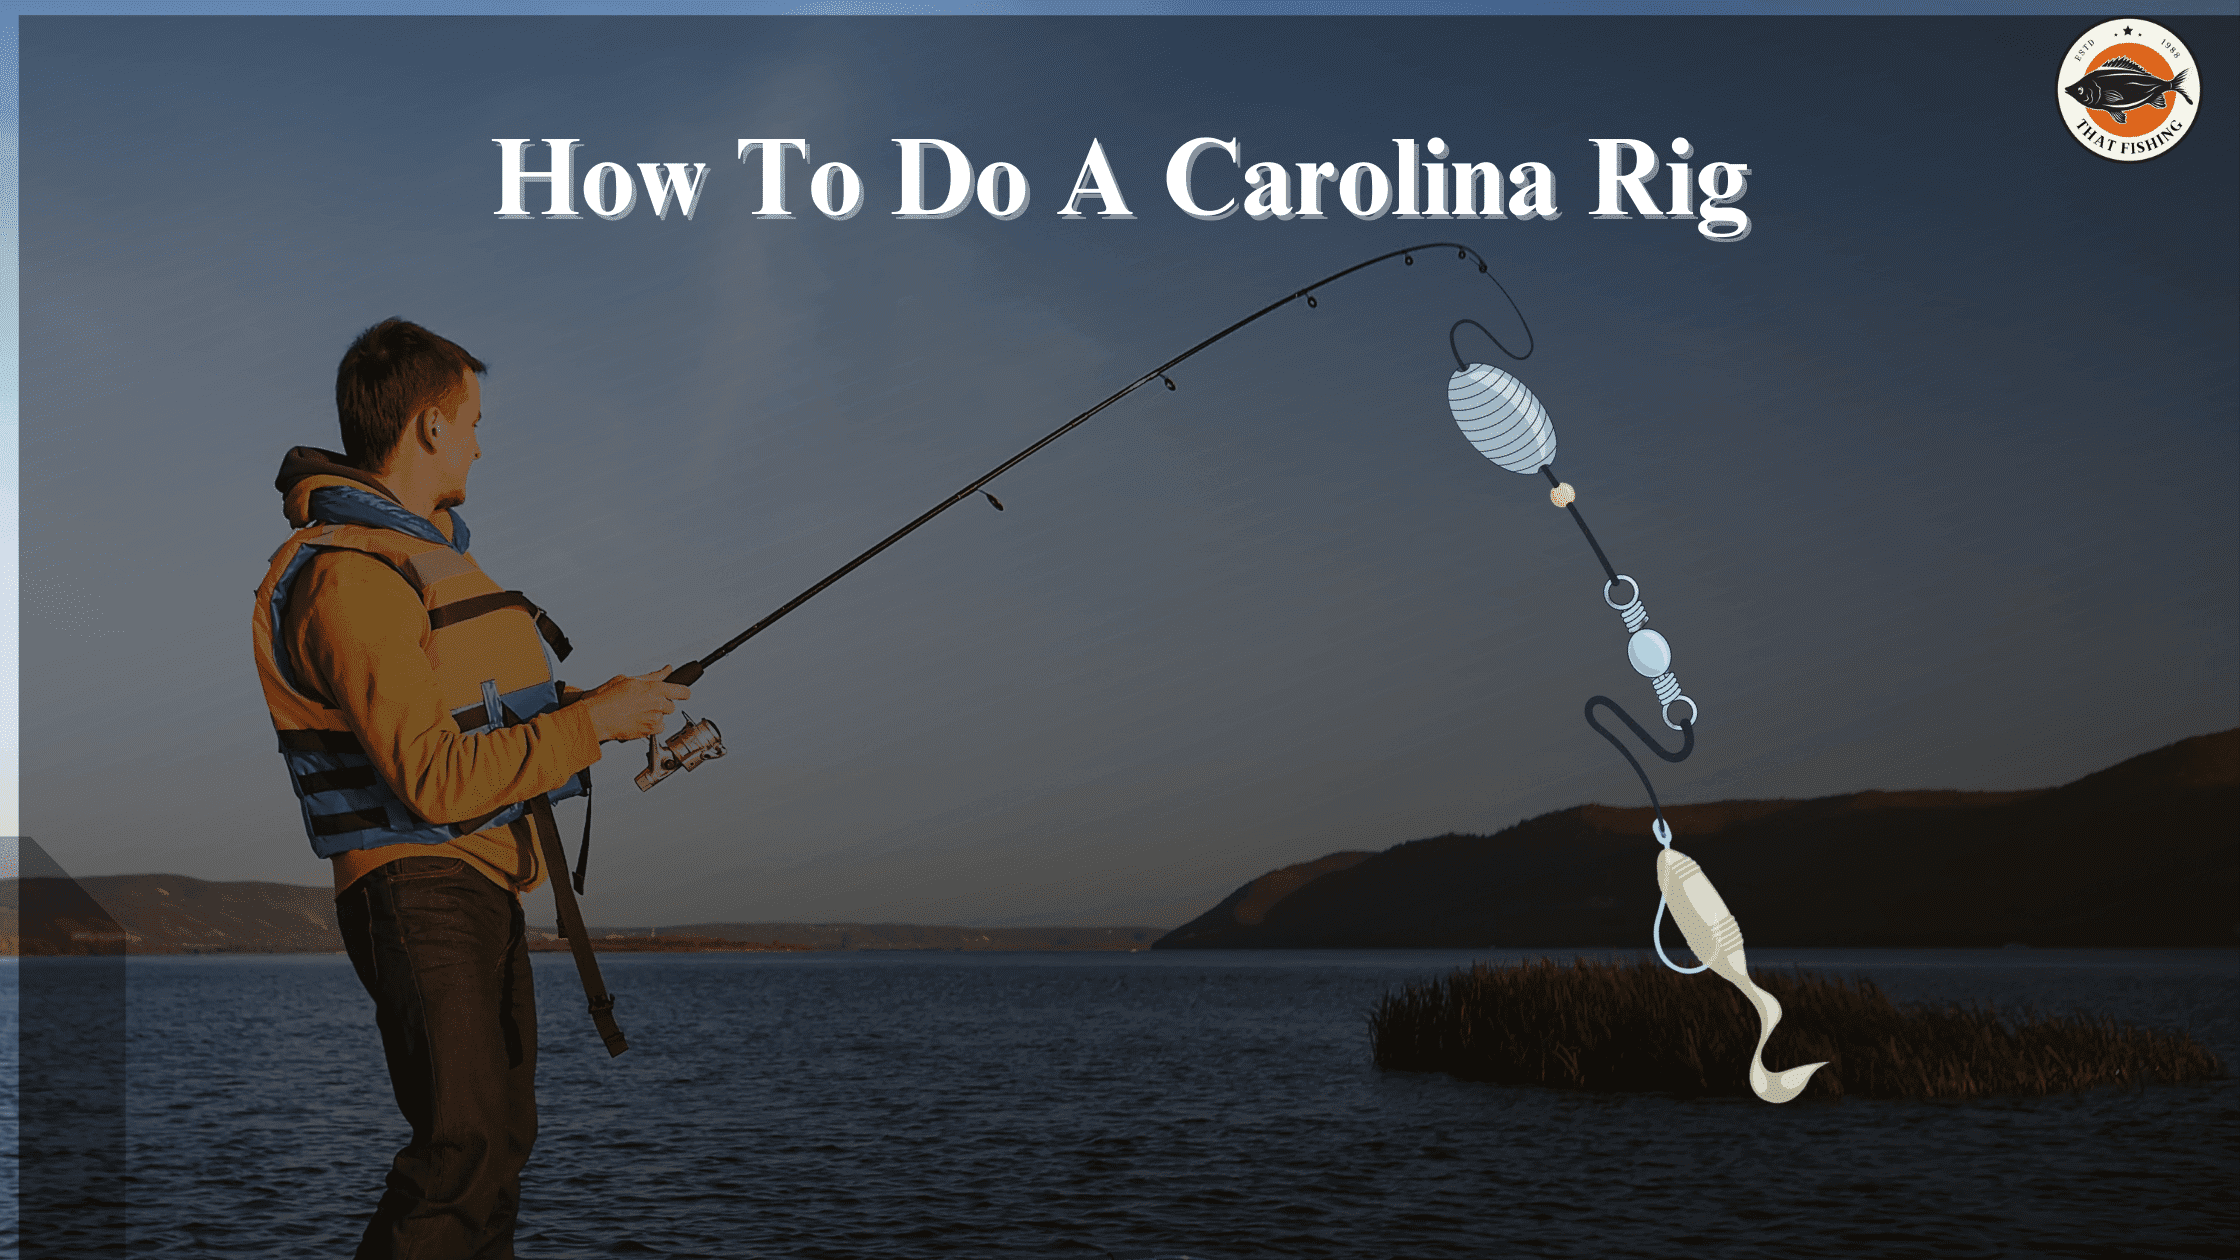 How to Tie a Carolina Rig: Step by Step Instructions